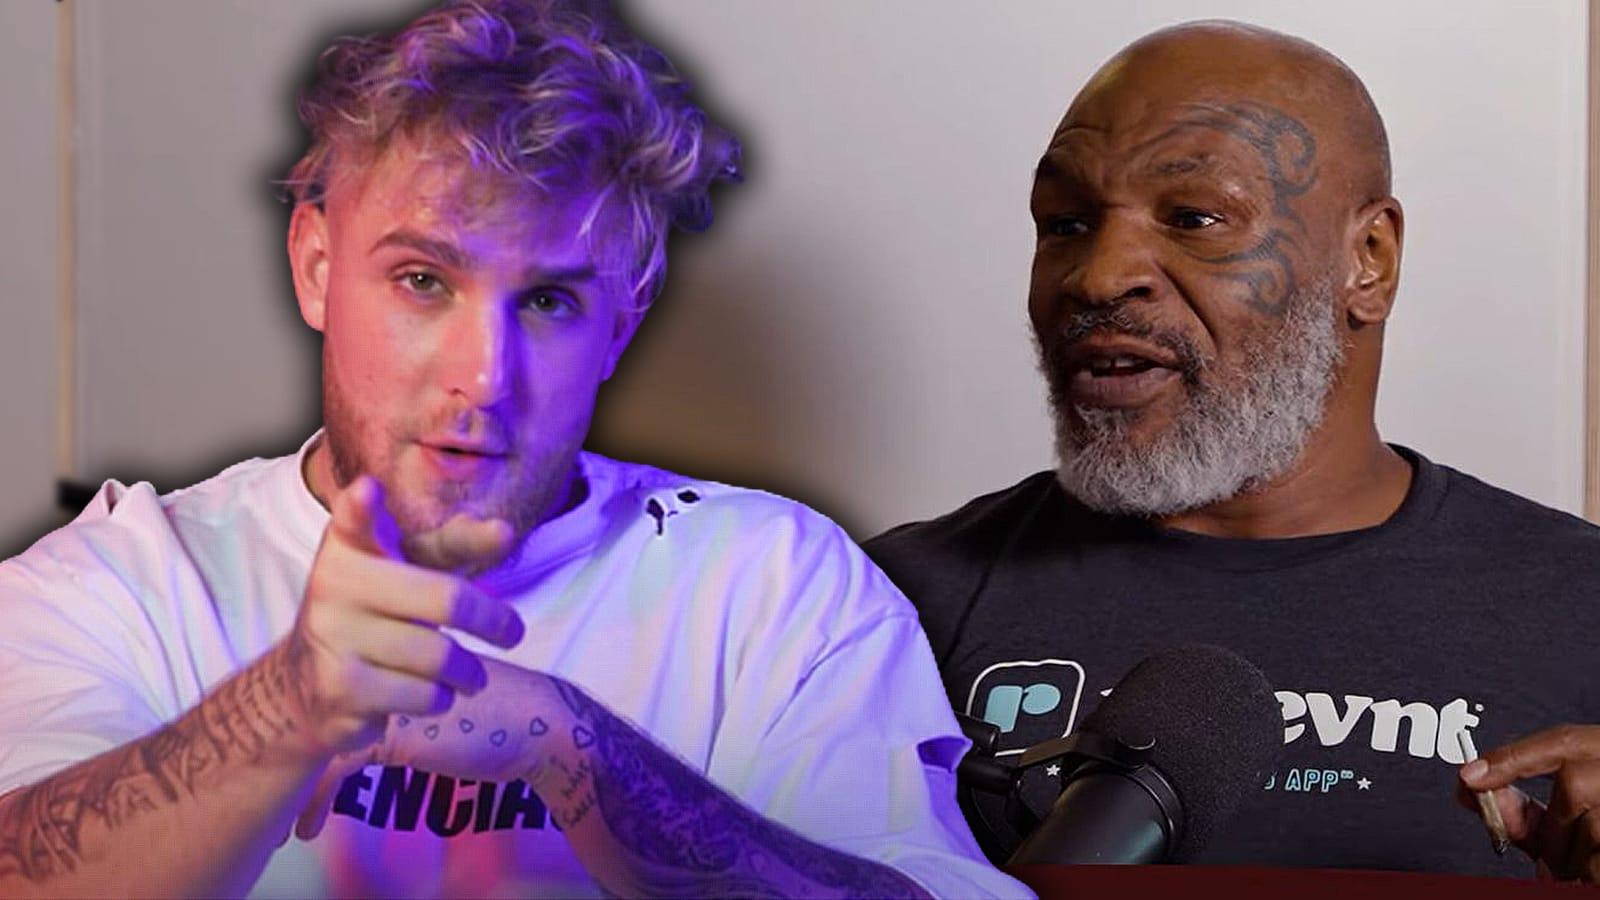 Jake Paul defends Mike Tyson over airplane beatdown